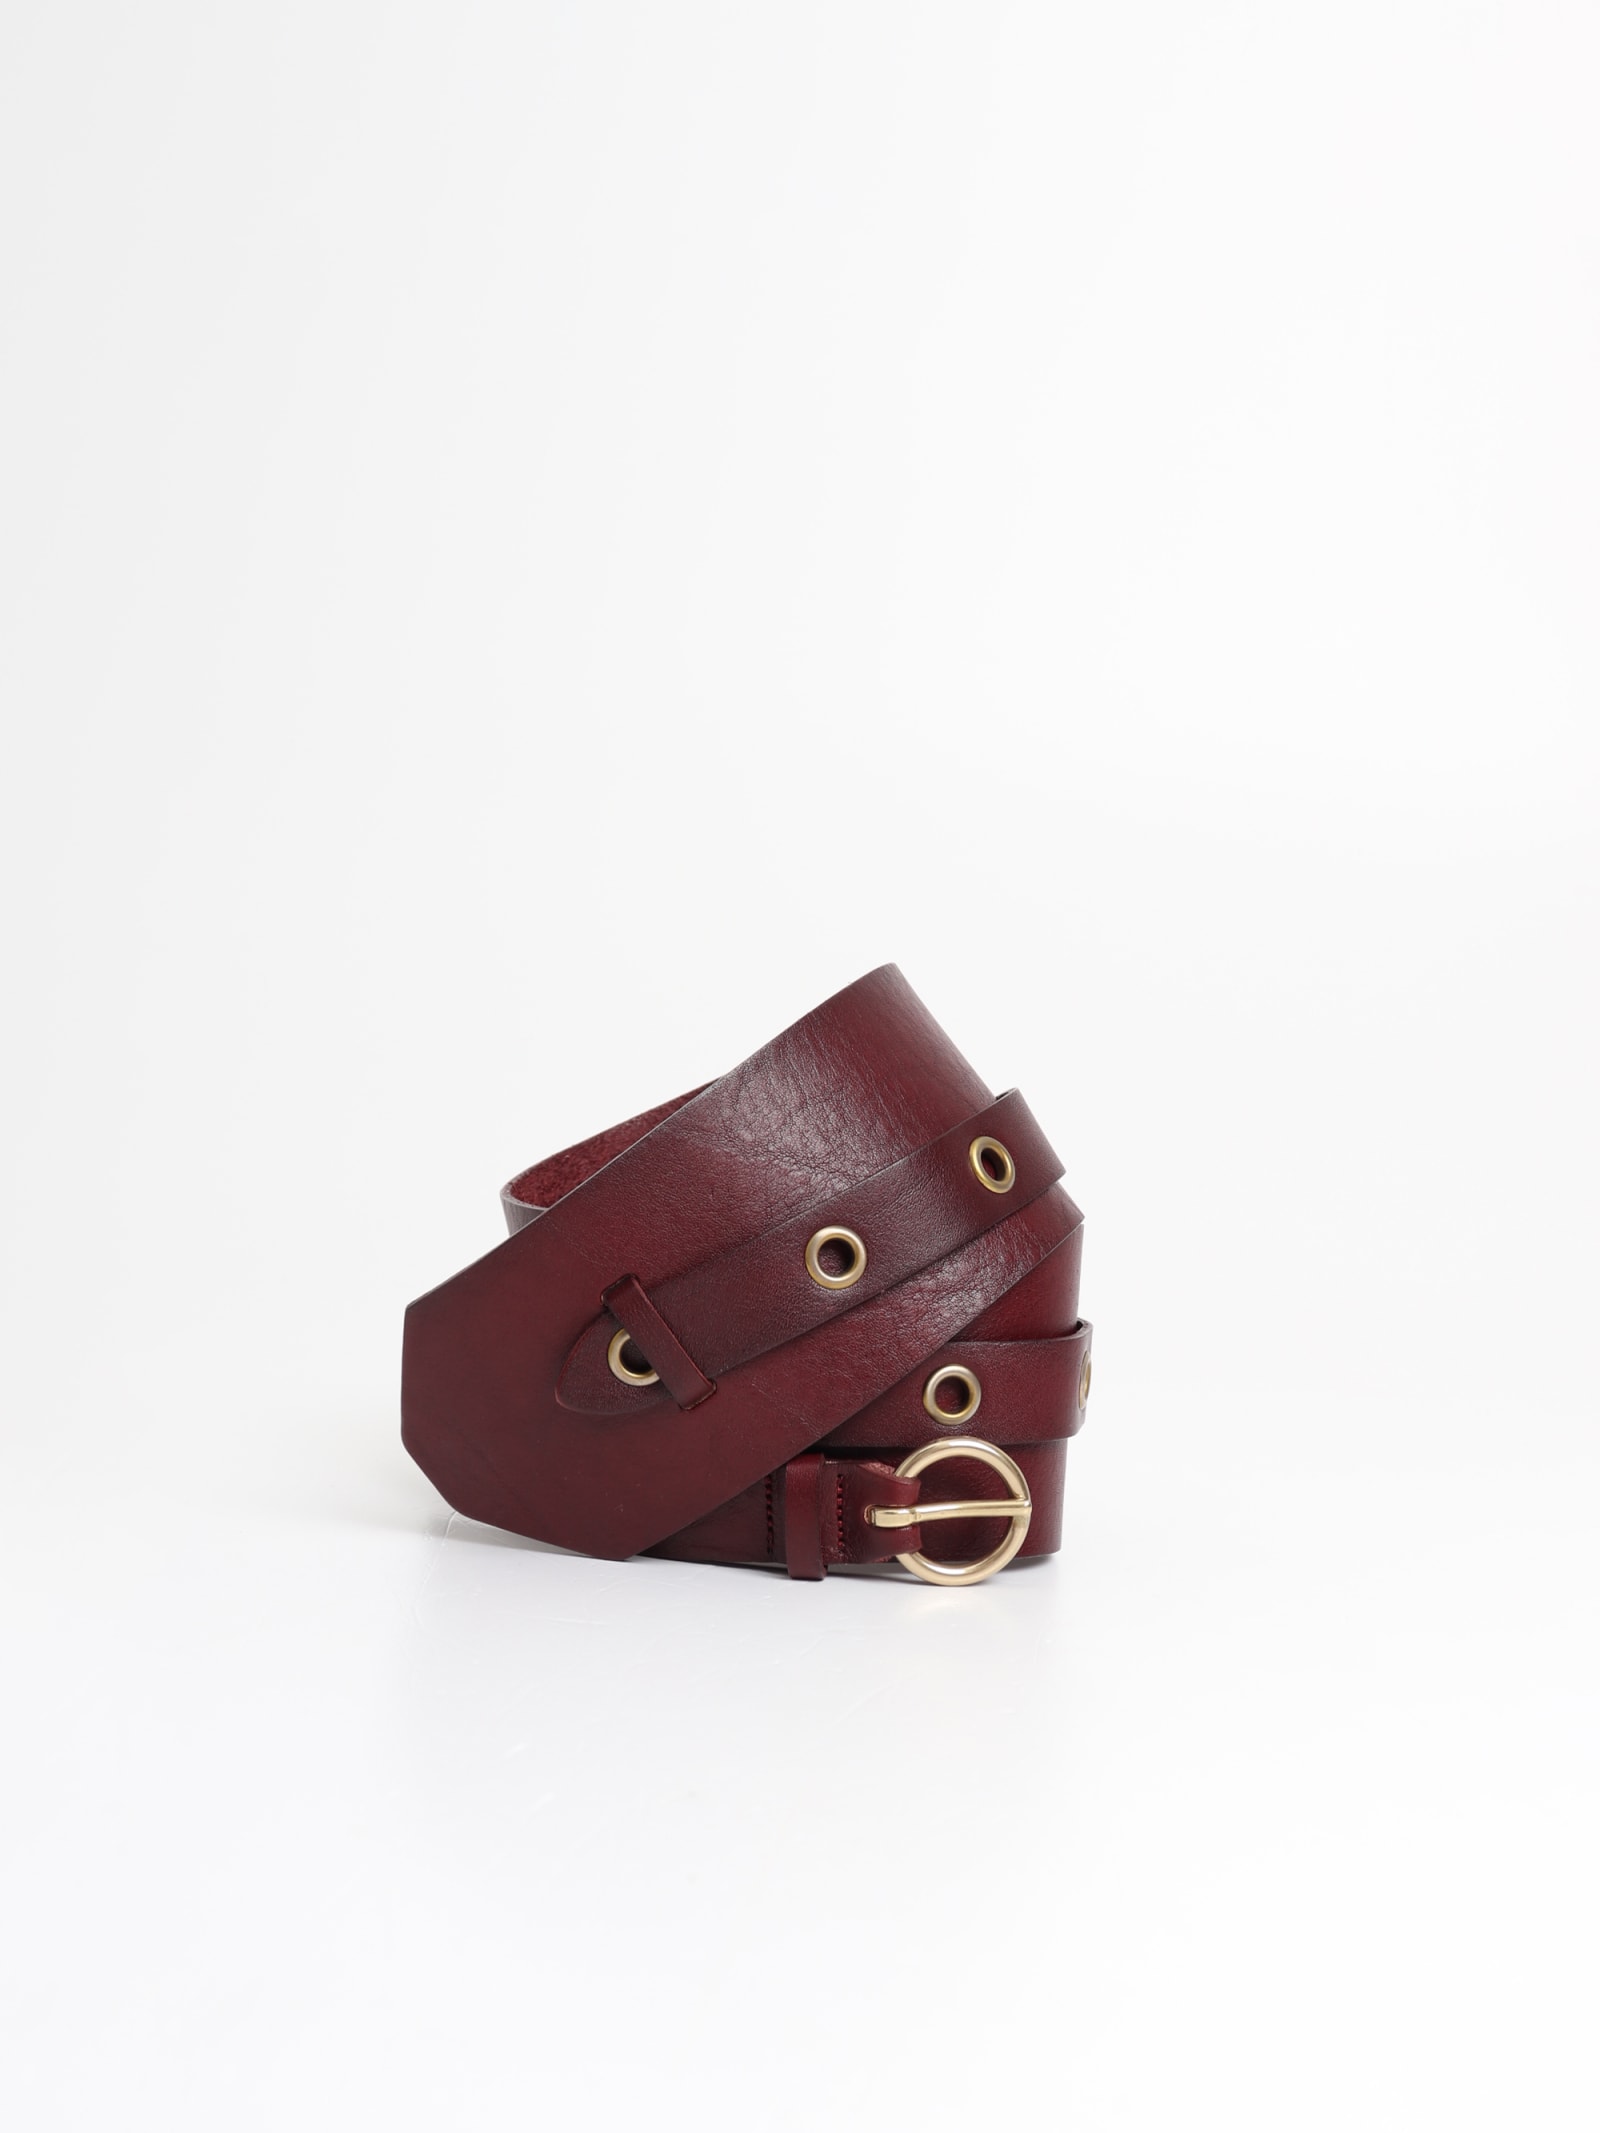 D'Amico Leather Belt